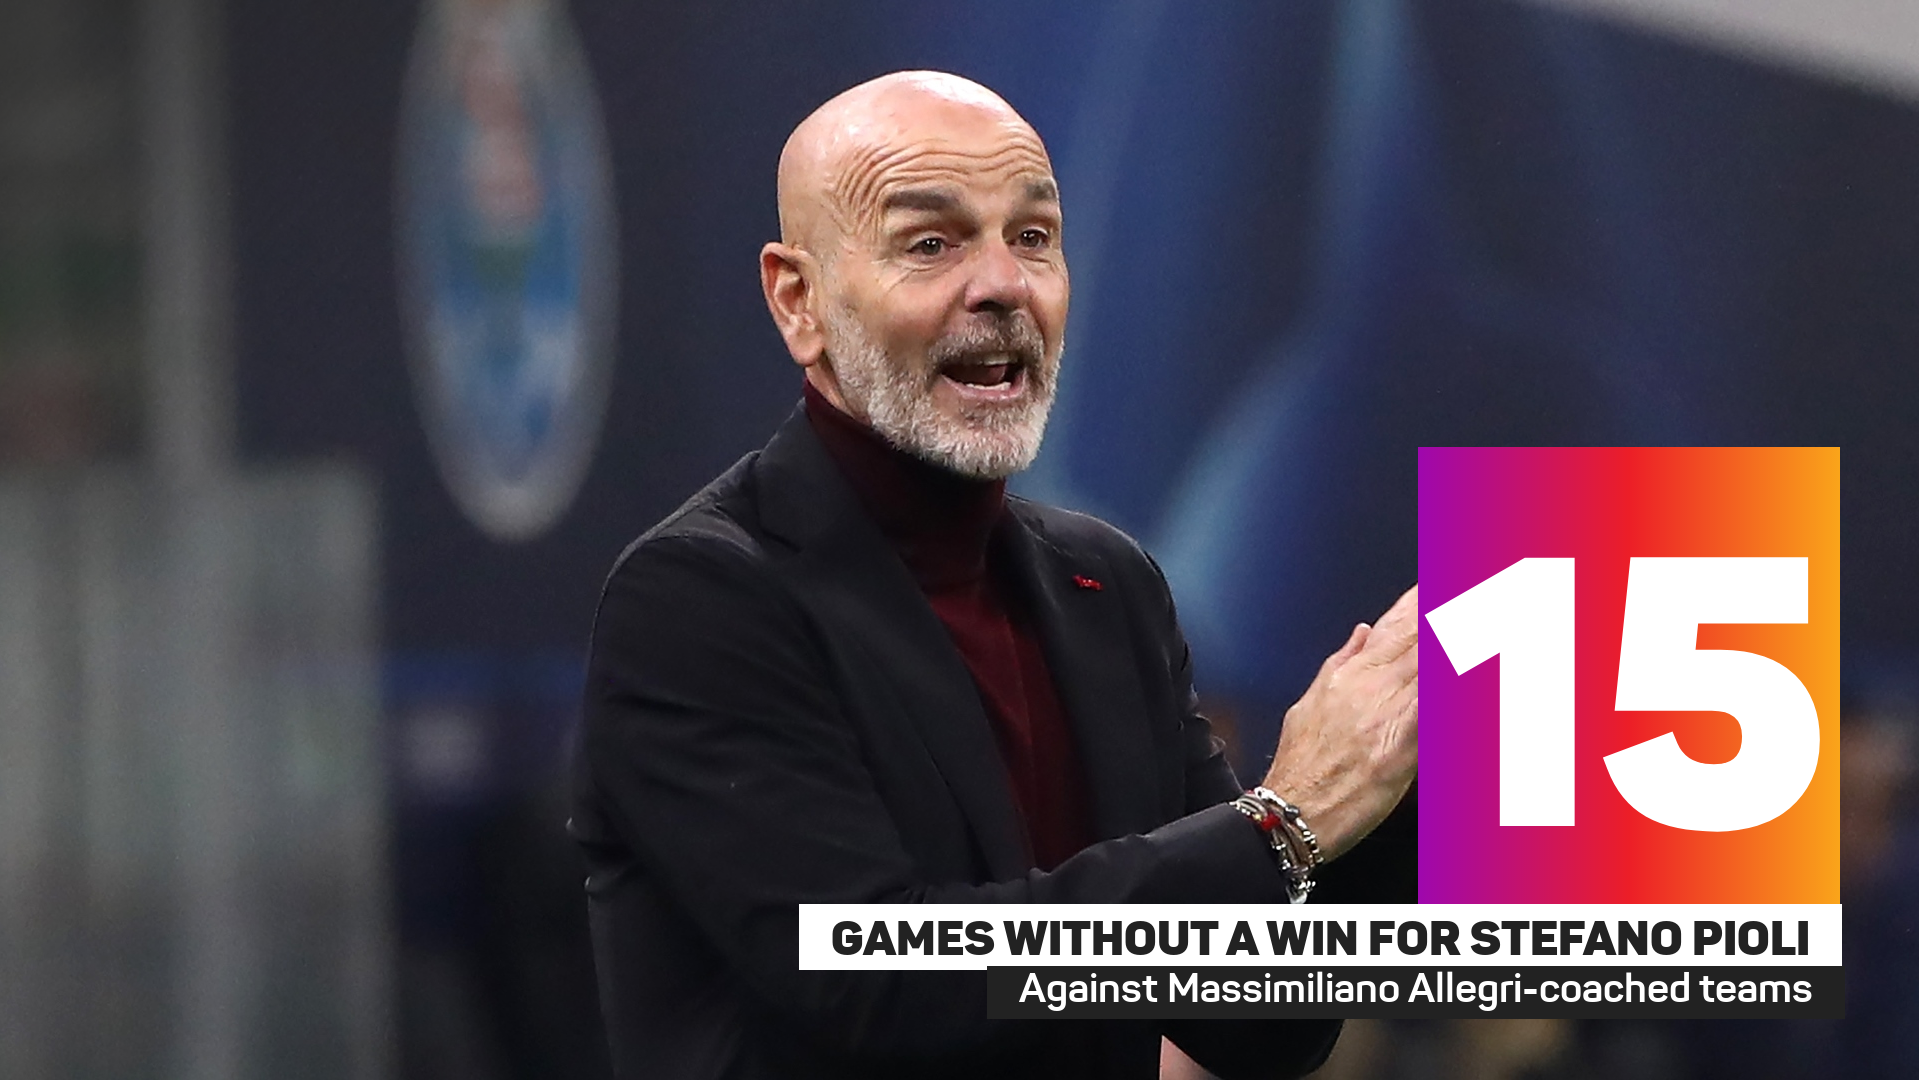 Pioli has a disappointing record against Allegri